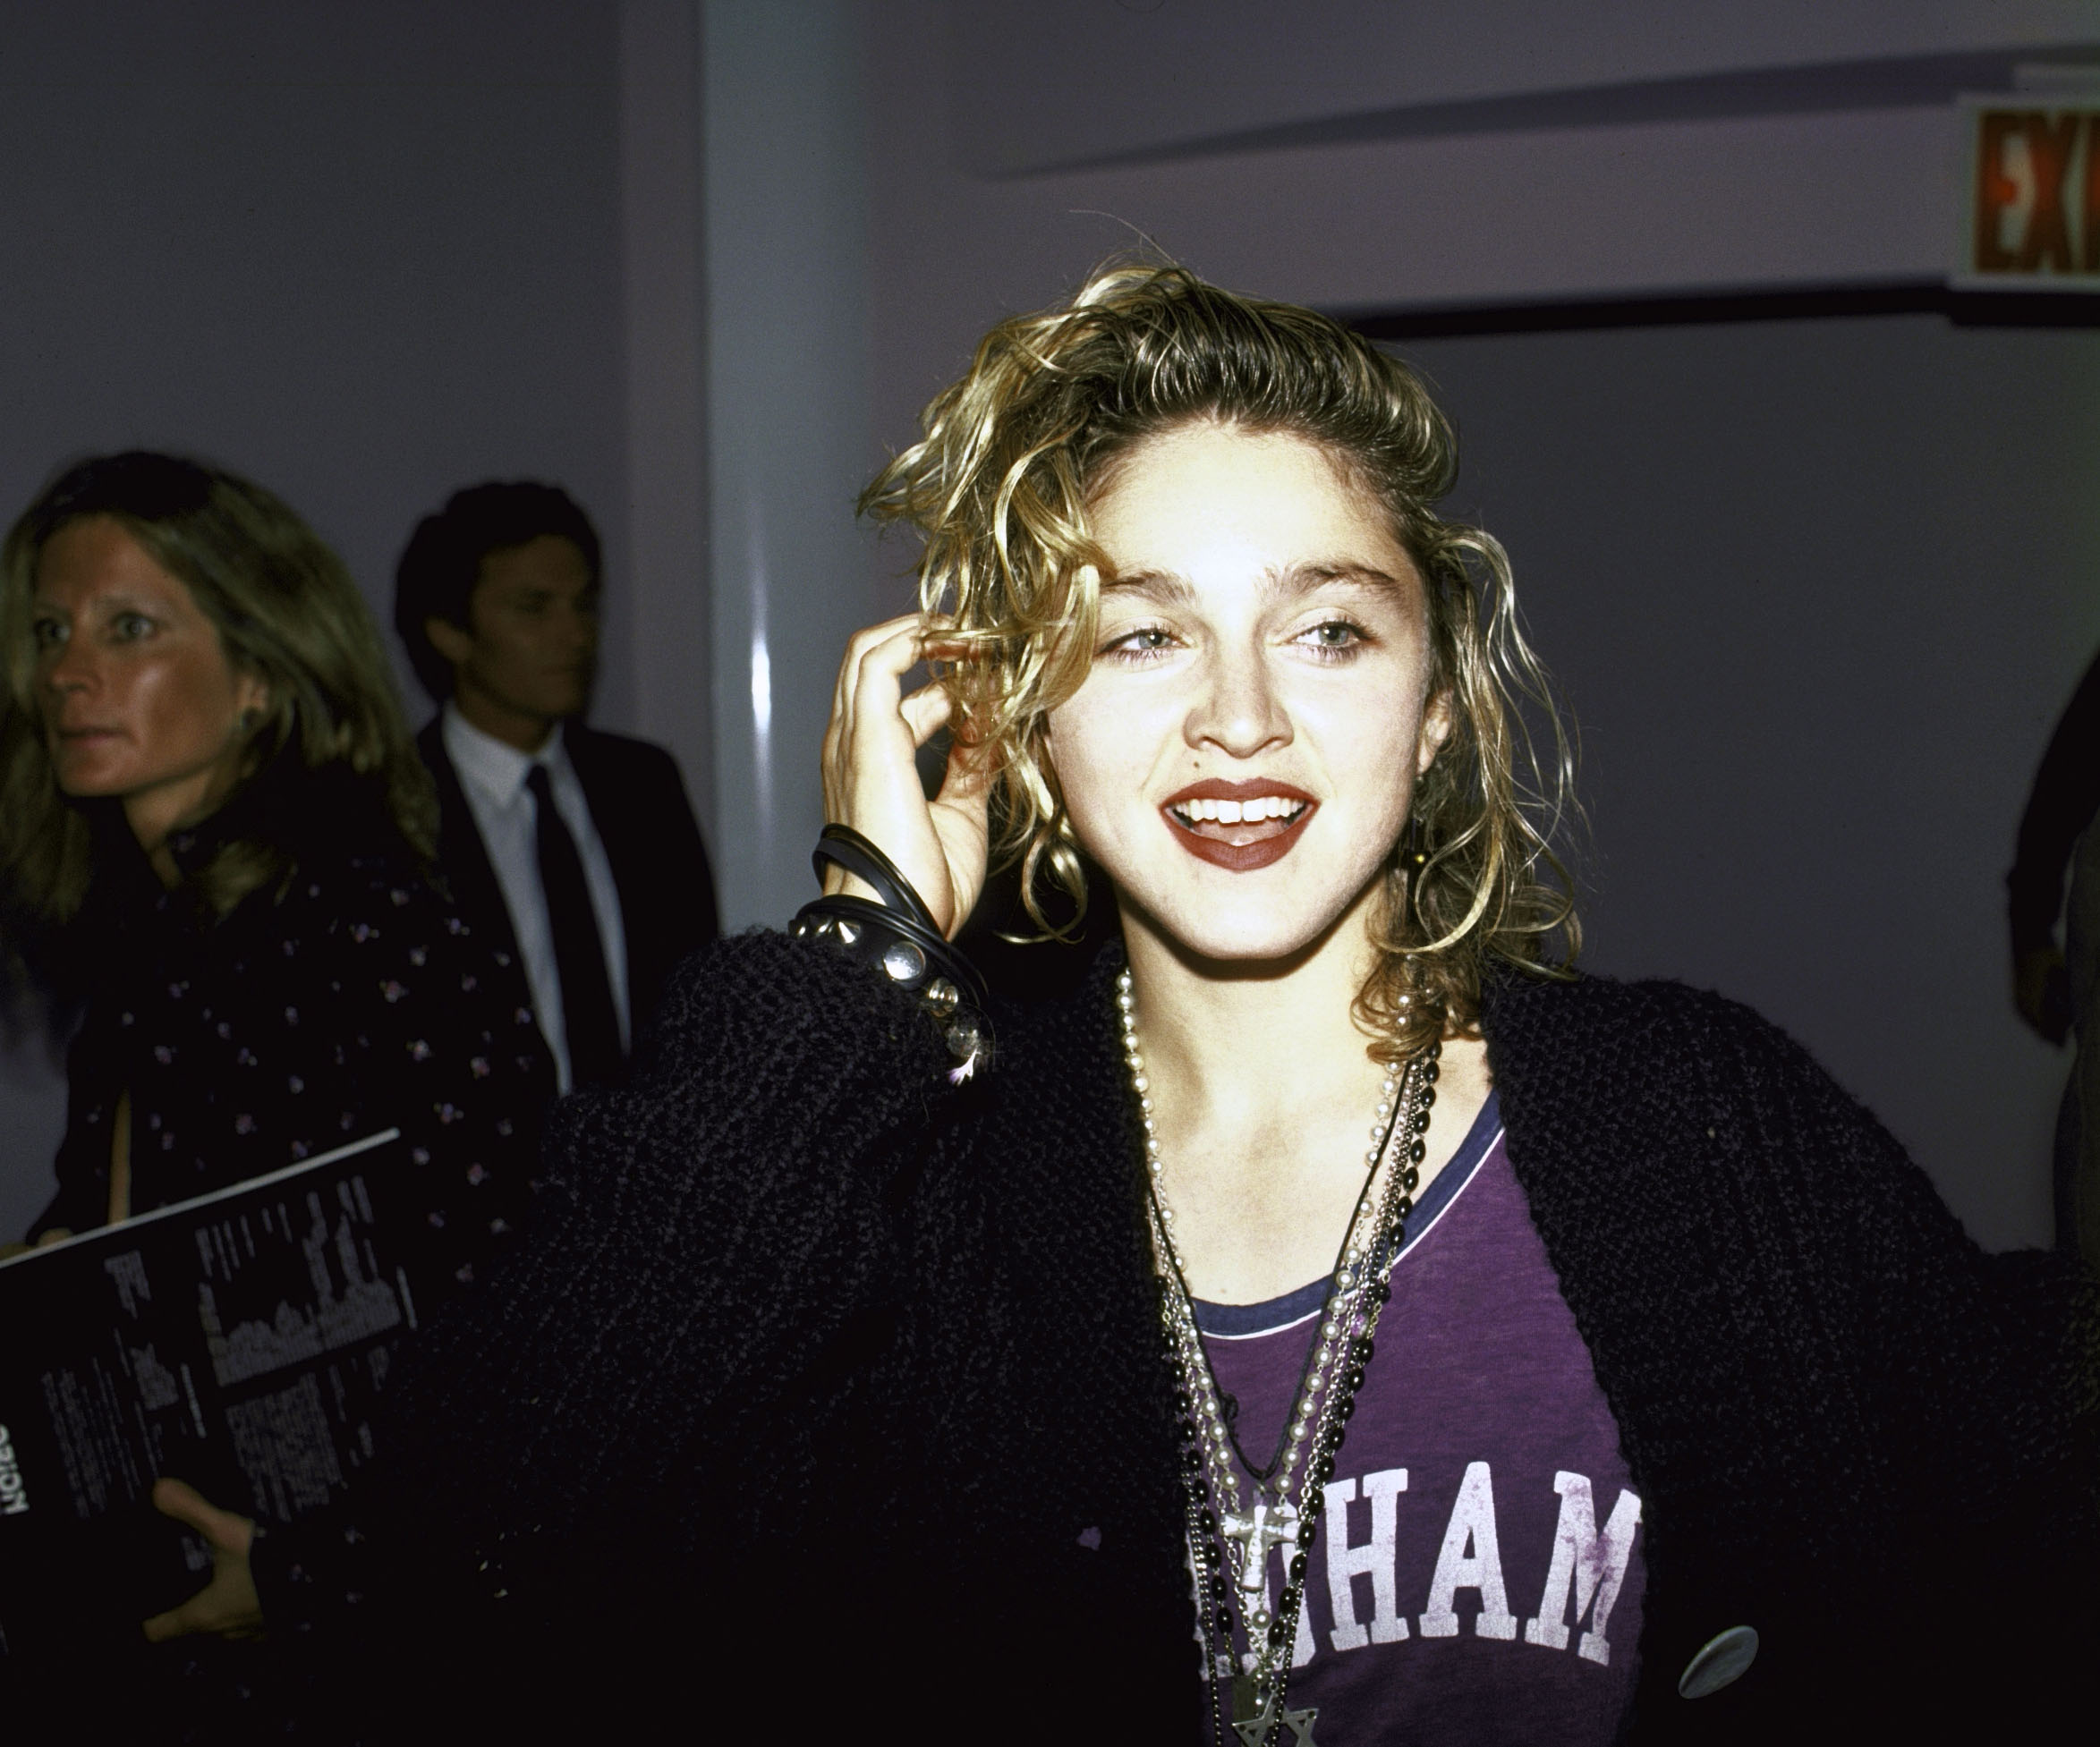 Madonna with blonde hair